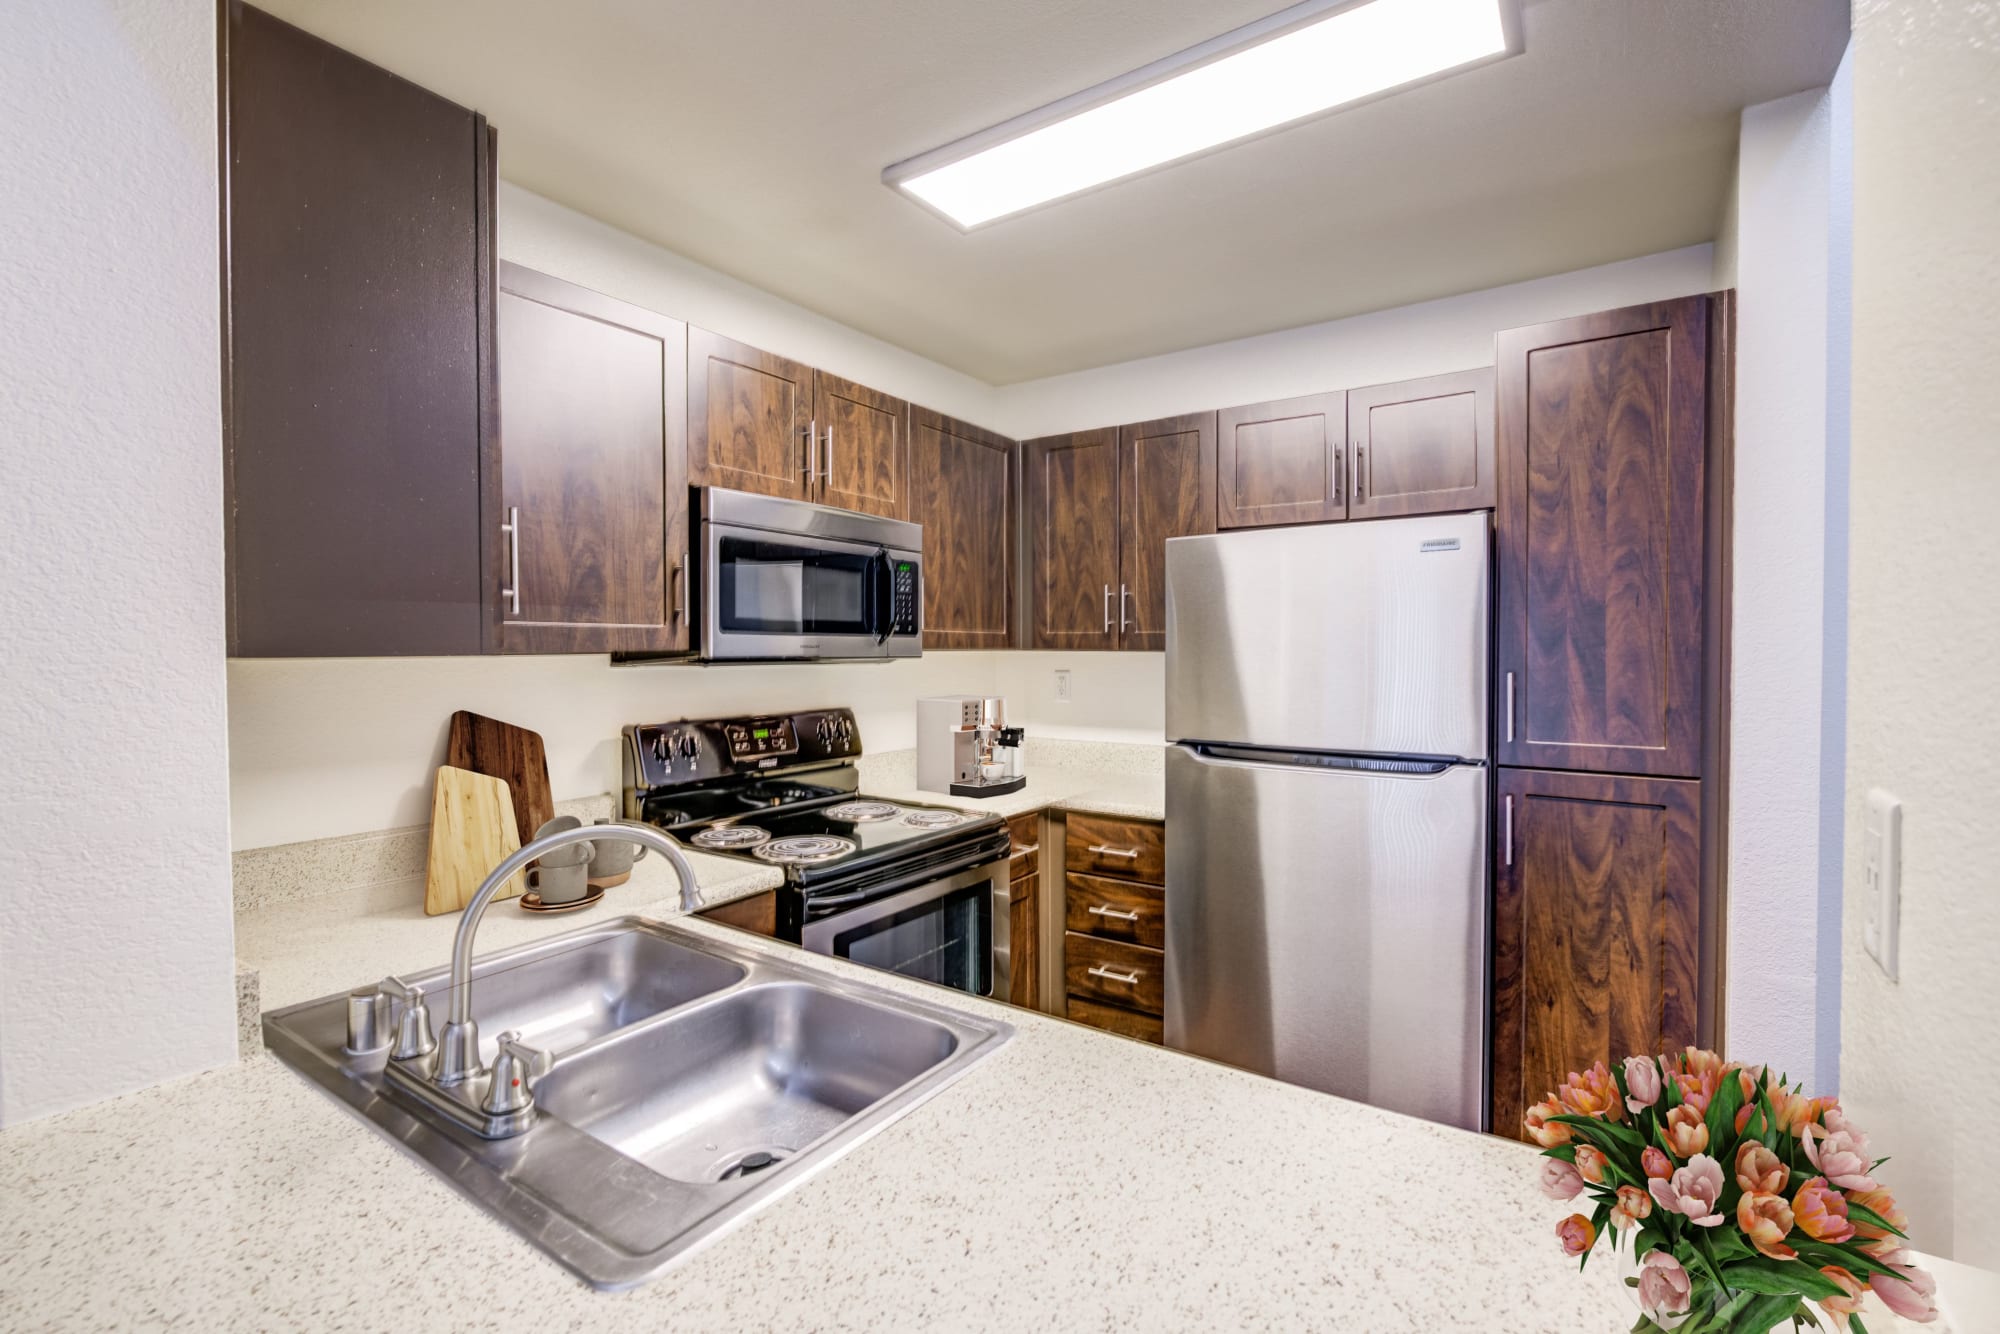 Renovated kitchen with brown cabinets and stainless steel appliances at Tuscany Village Apartments in Ontario, California